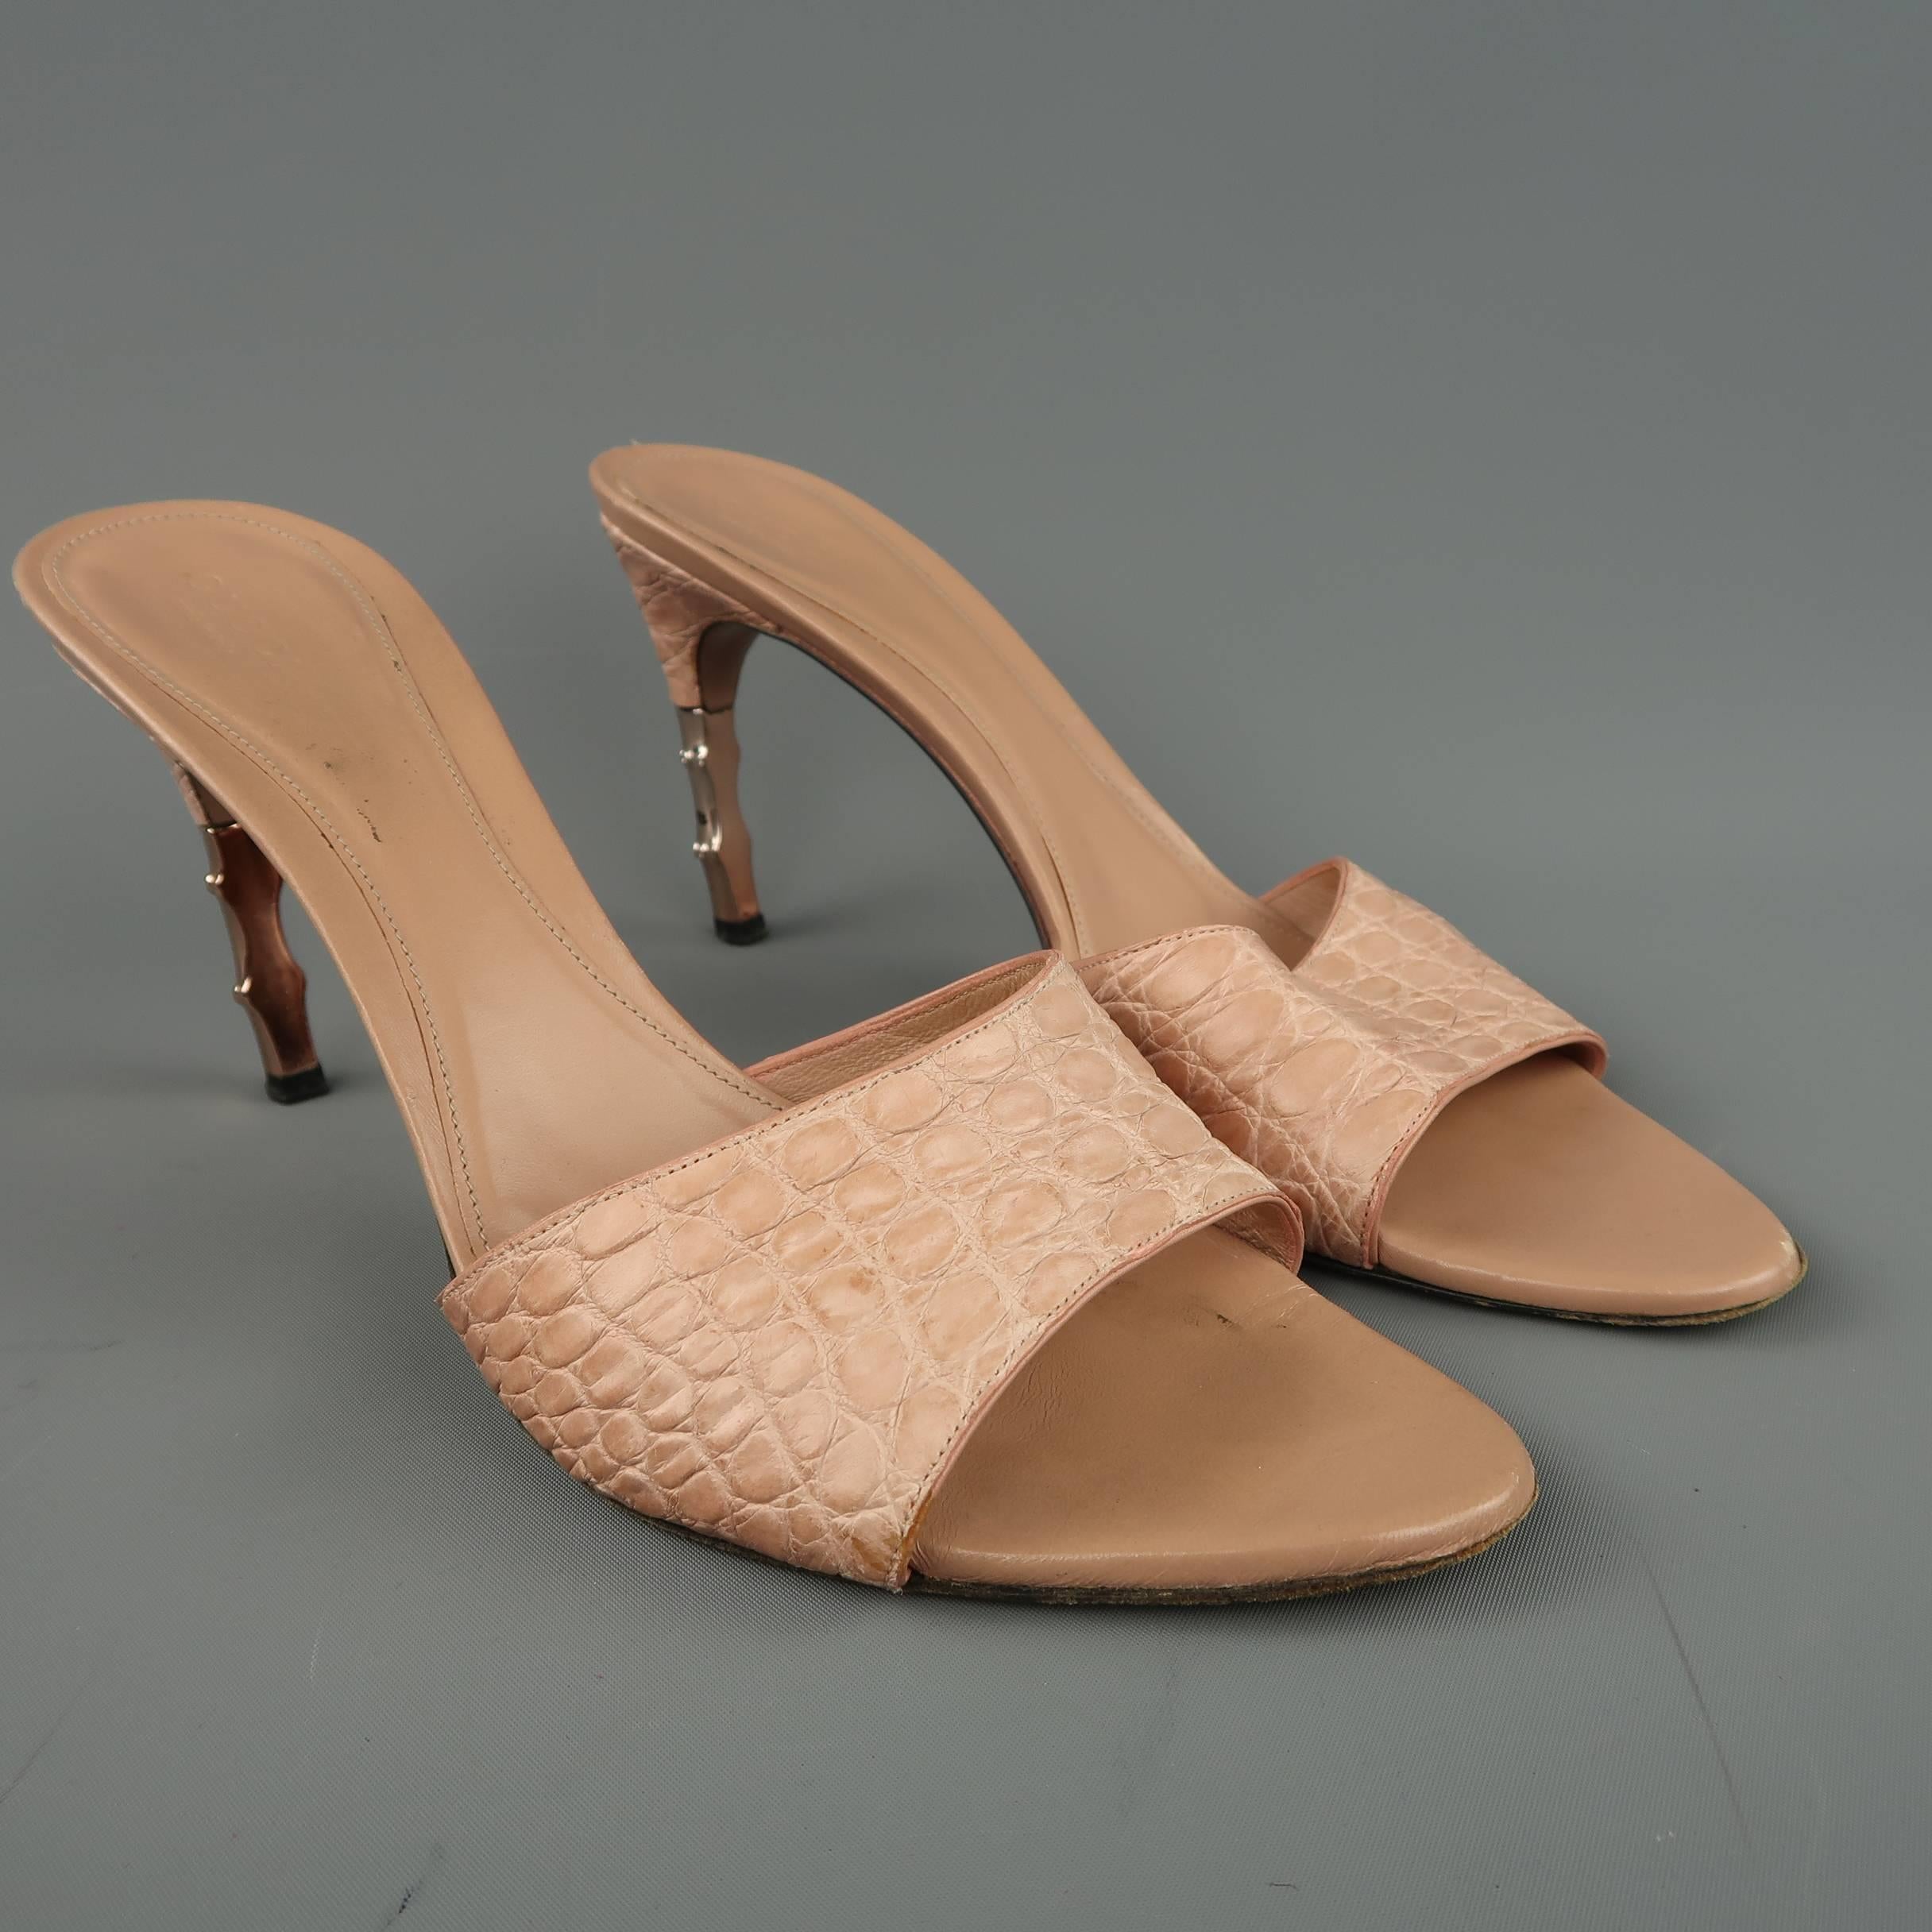 GUCCI mule sandals come in a dusty rose pink alligator textured leather with a half covered, rose gold tone metal bamboo heel. Wear throughout.As is. Made in Italy.
 
Fair Pre-Owned Condition.
Marked: 10 B
 
Heel: 4 in.